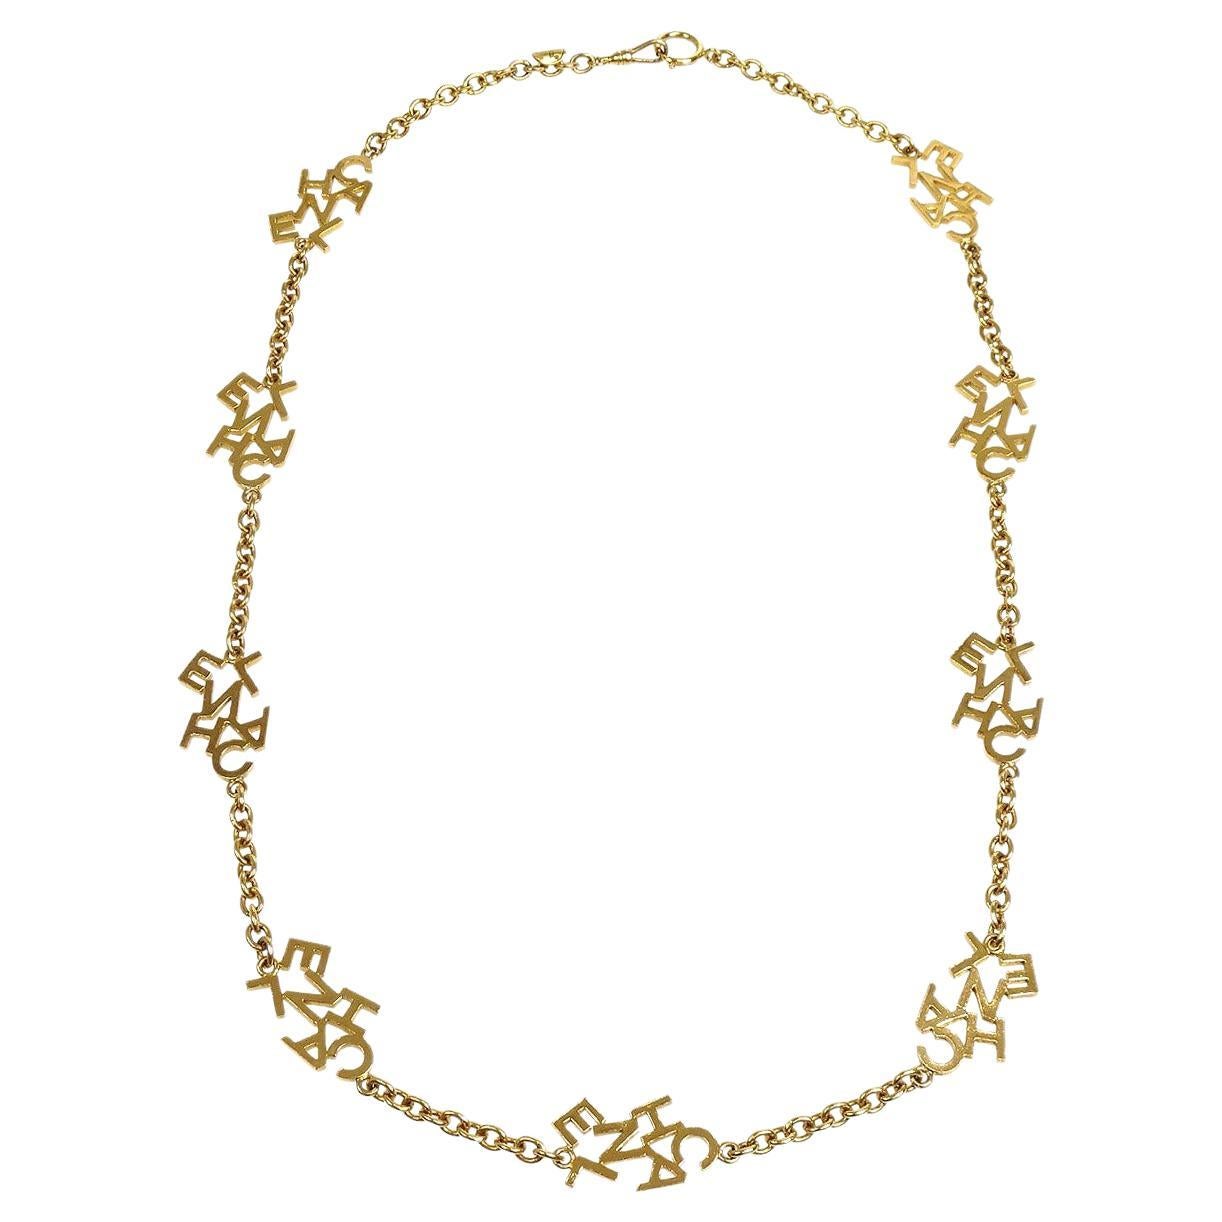 CHANEL 'CHANEL' Gold Metal Logo Charm Link Chain Necklace  For Sale